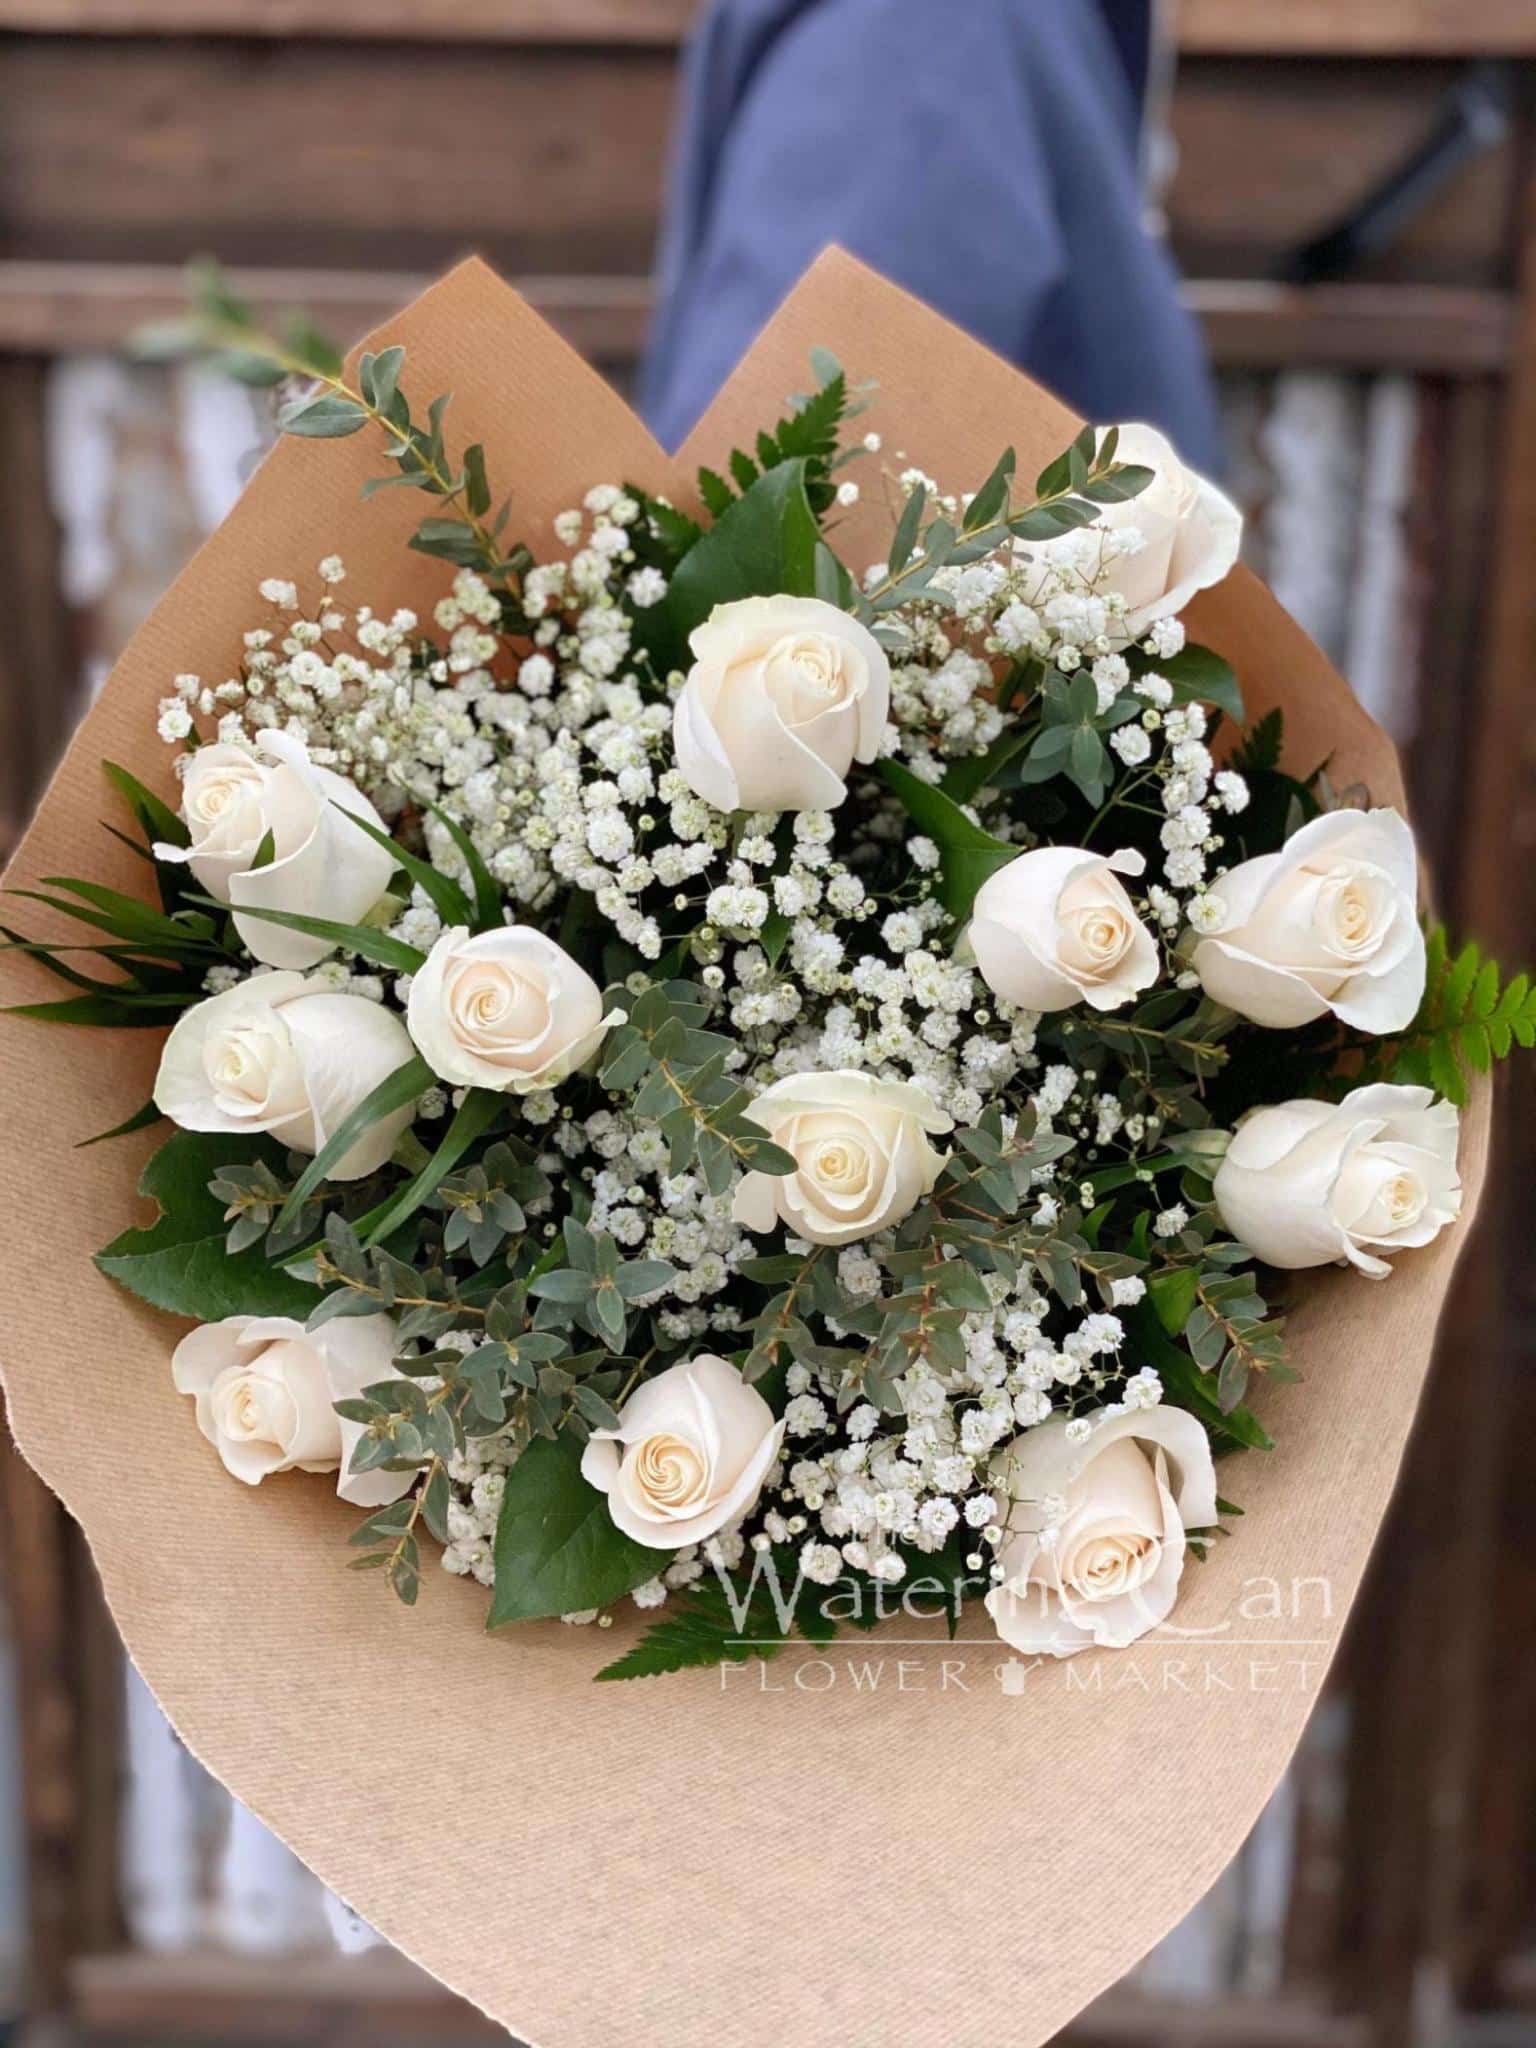 https://thewateringcan.ca/wp-content/uploads/2021/03/One-Dozen-White-Roses-scaled-1-scaled-scaled.jpg